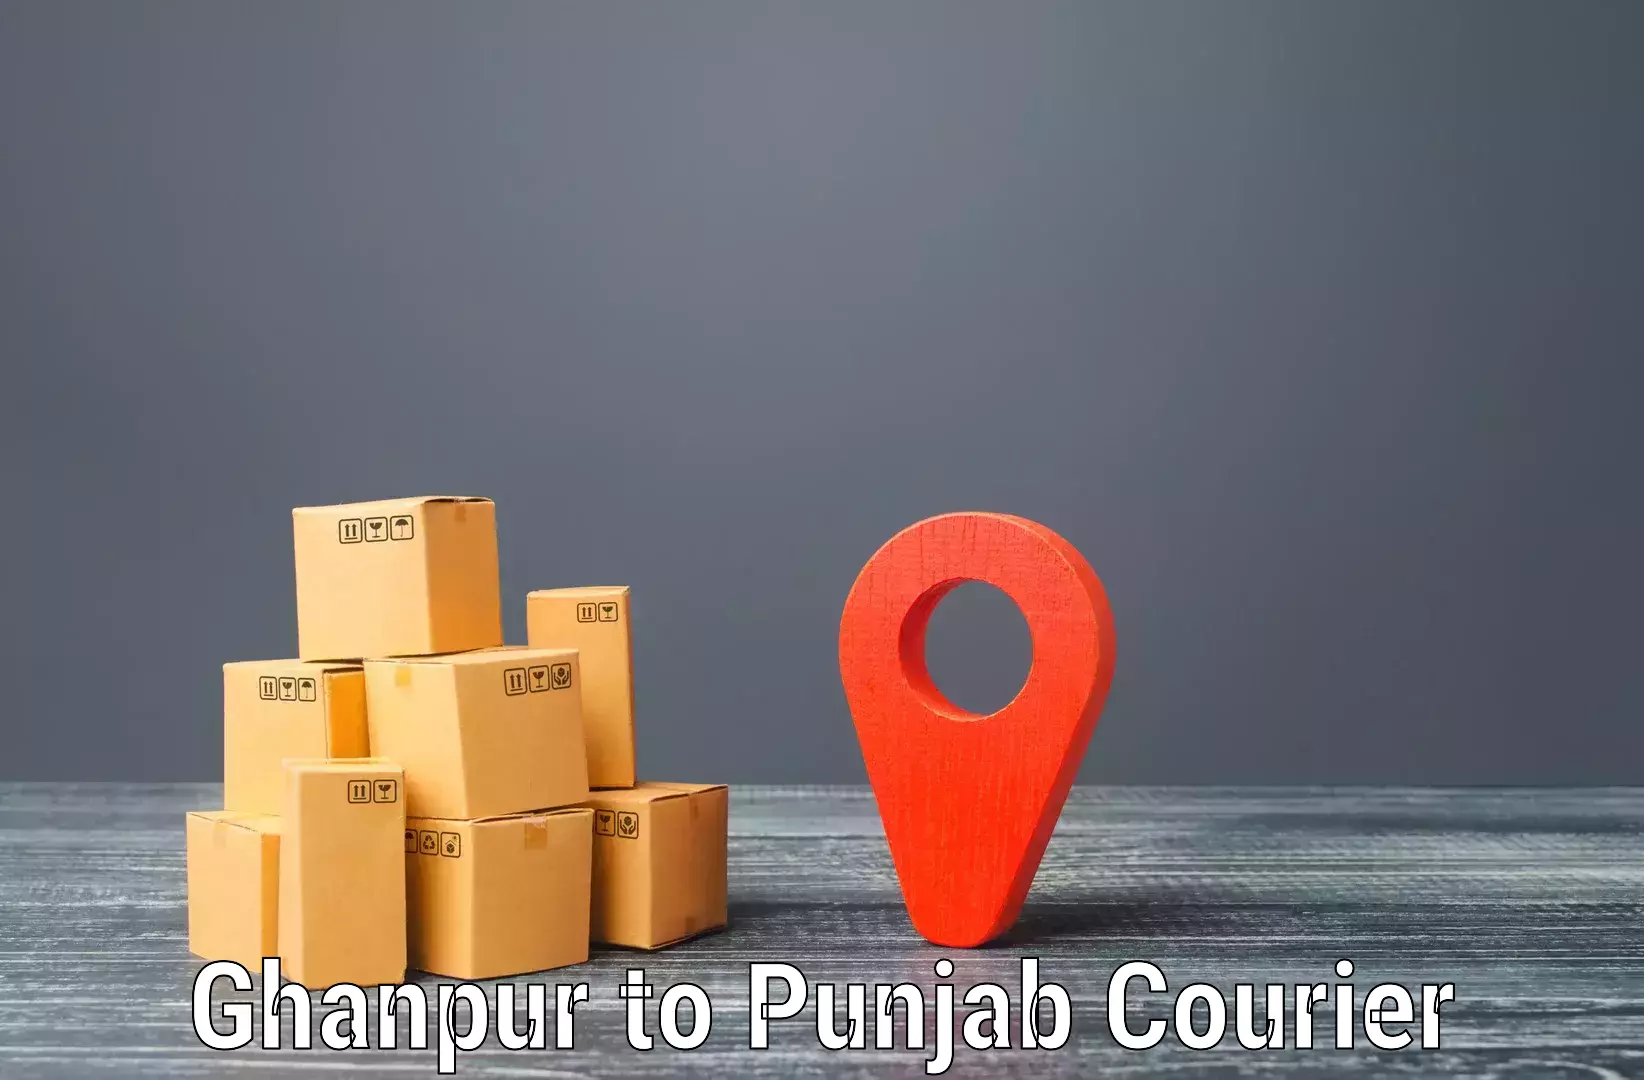 Express postal services Ghanpur to Bathinda